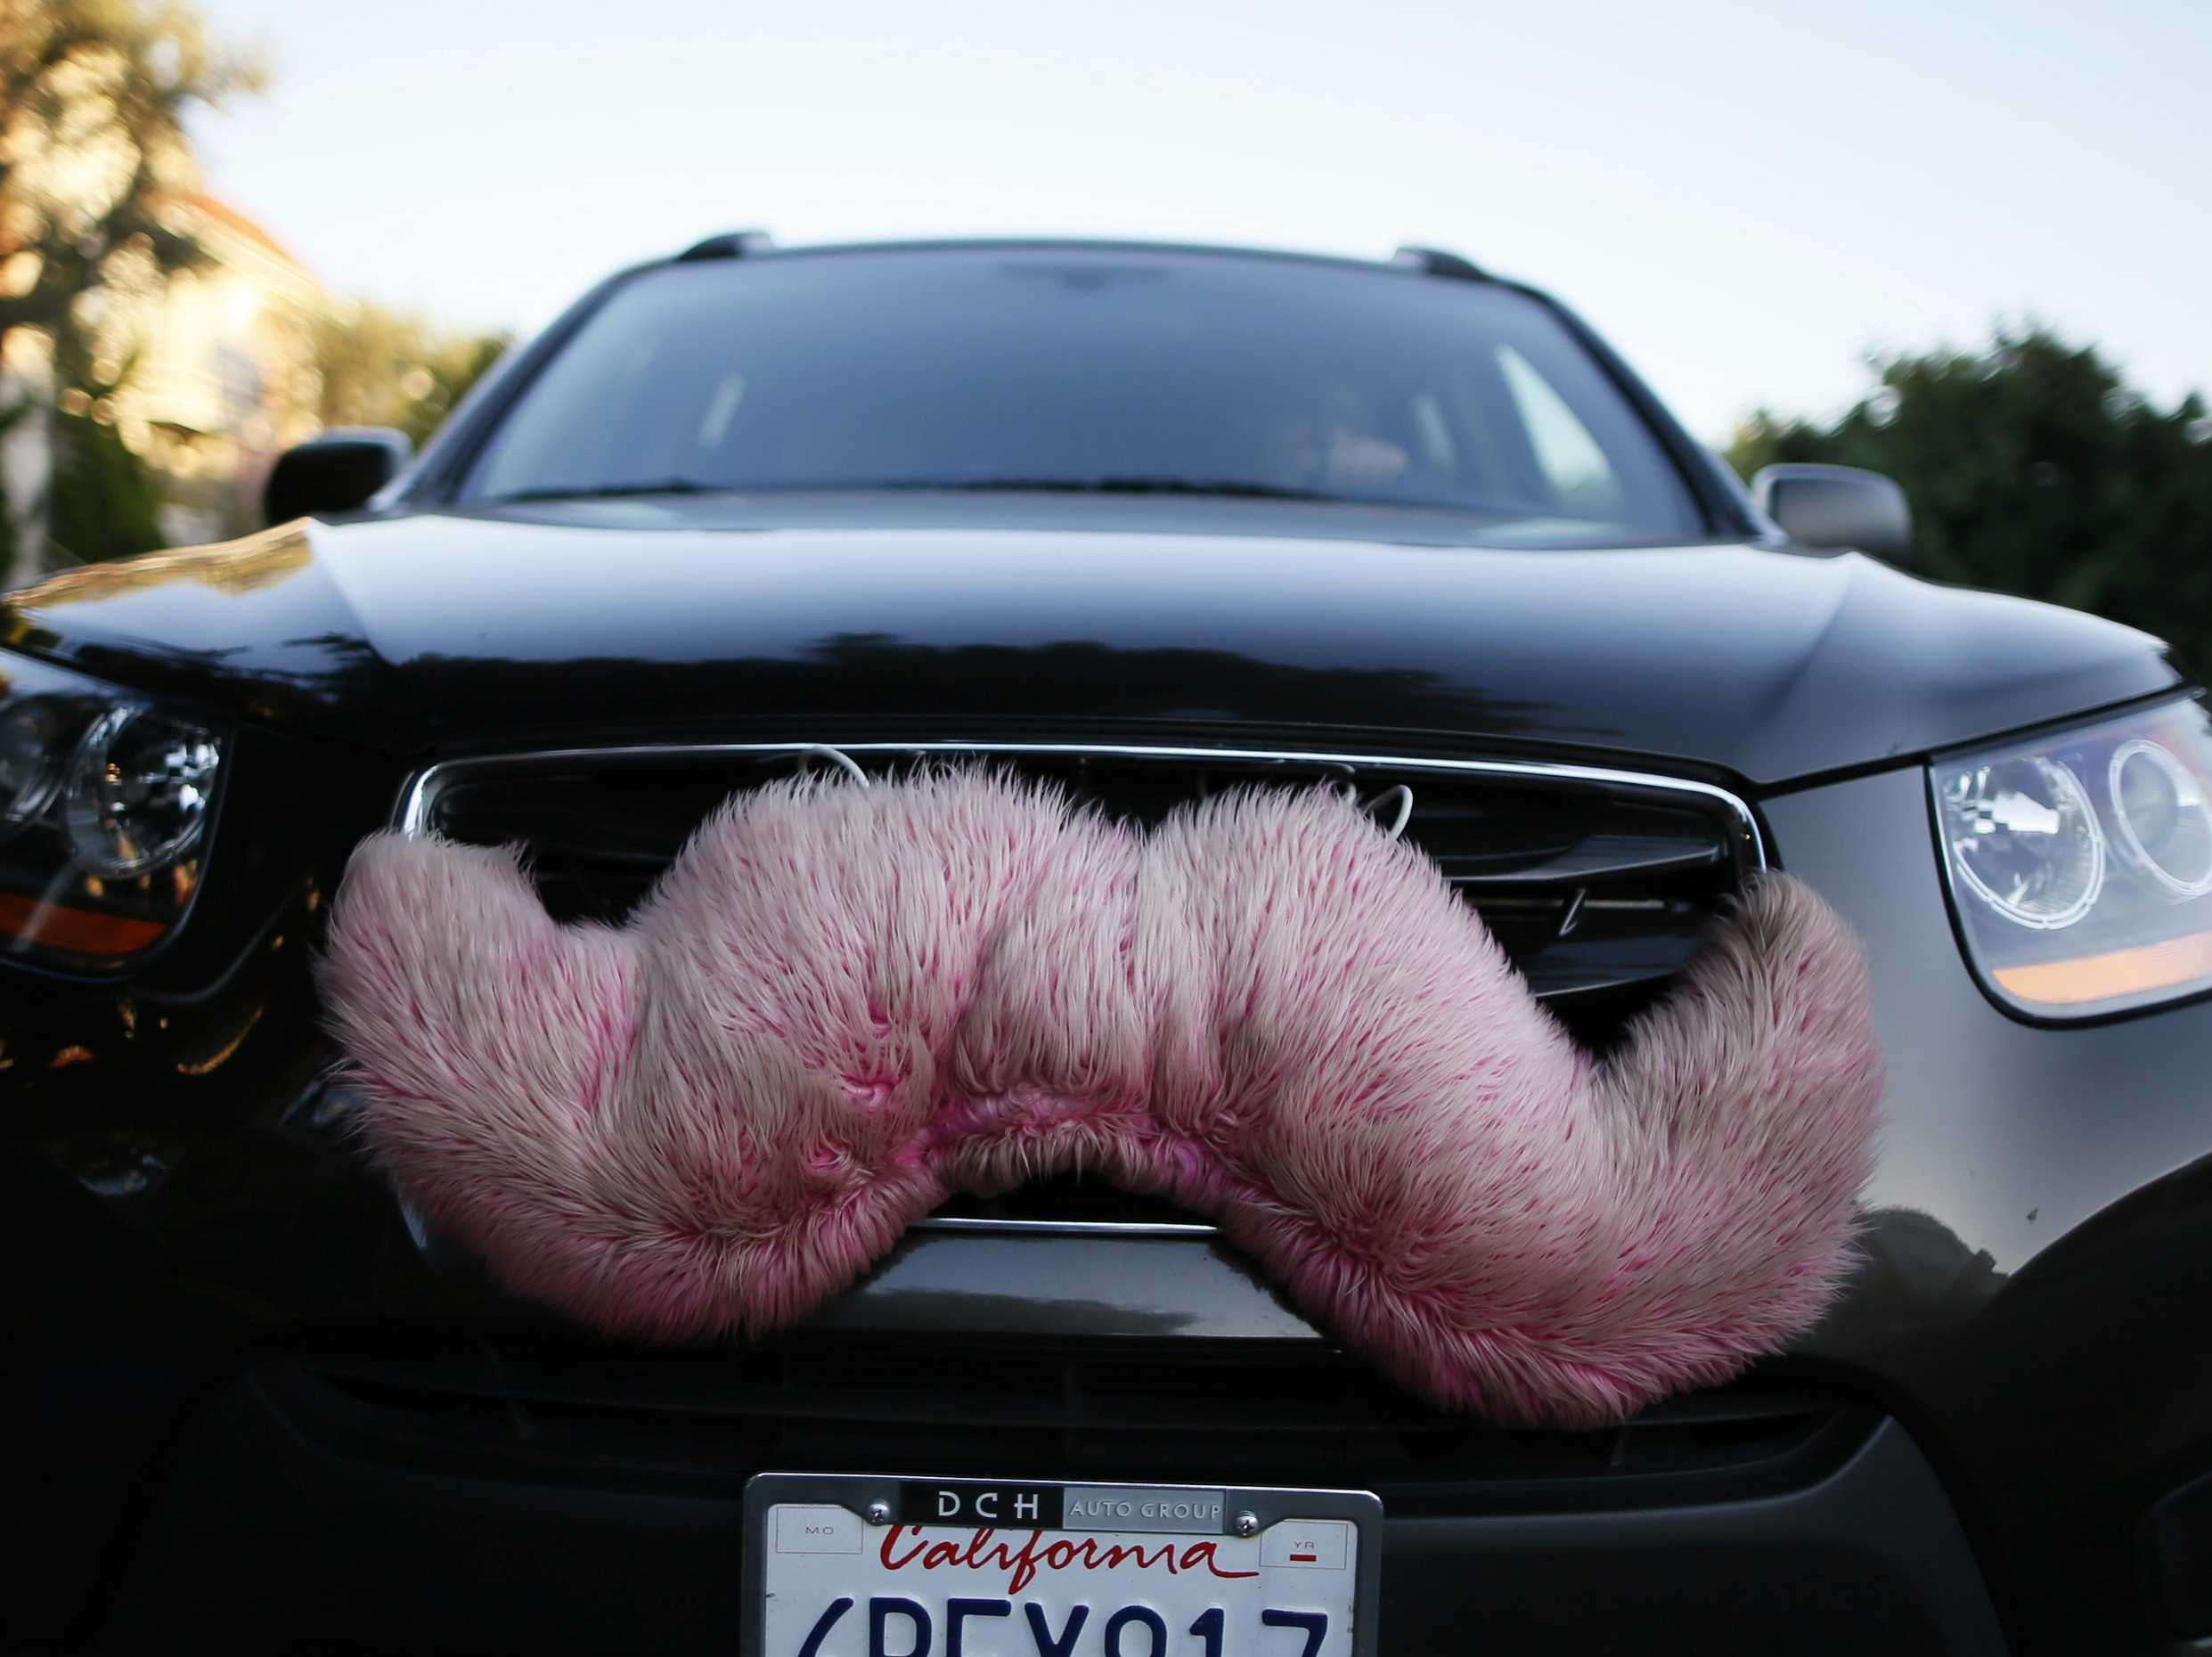 Pink Mustache Lyft Logo - Lyft Is Getting Rid Of Its Trademark Pink Mustache For A Less Cuddly